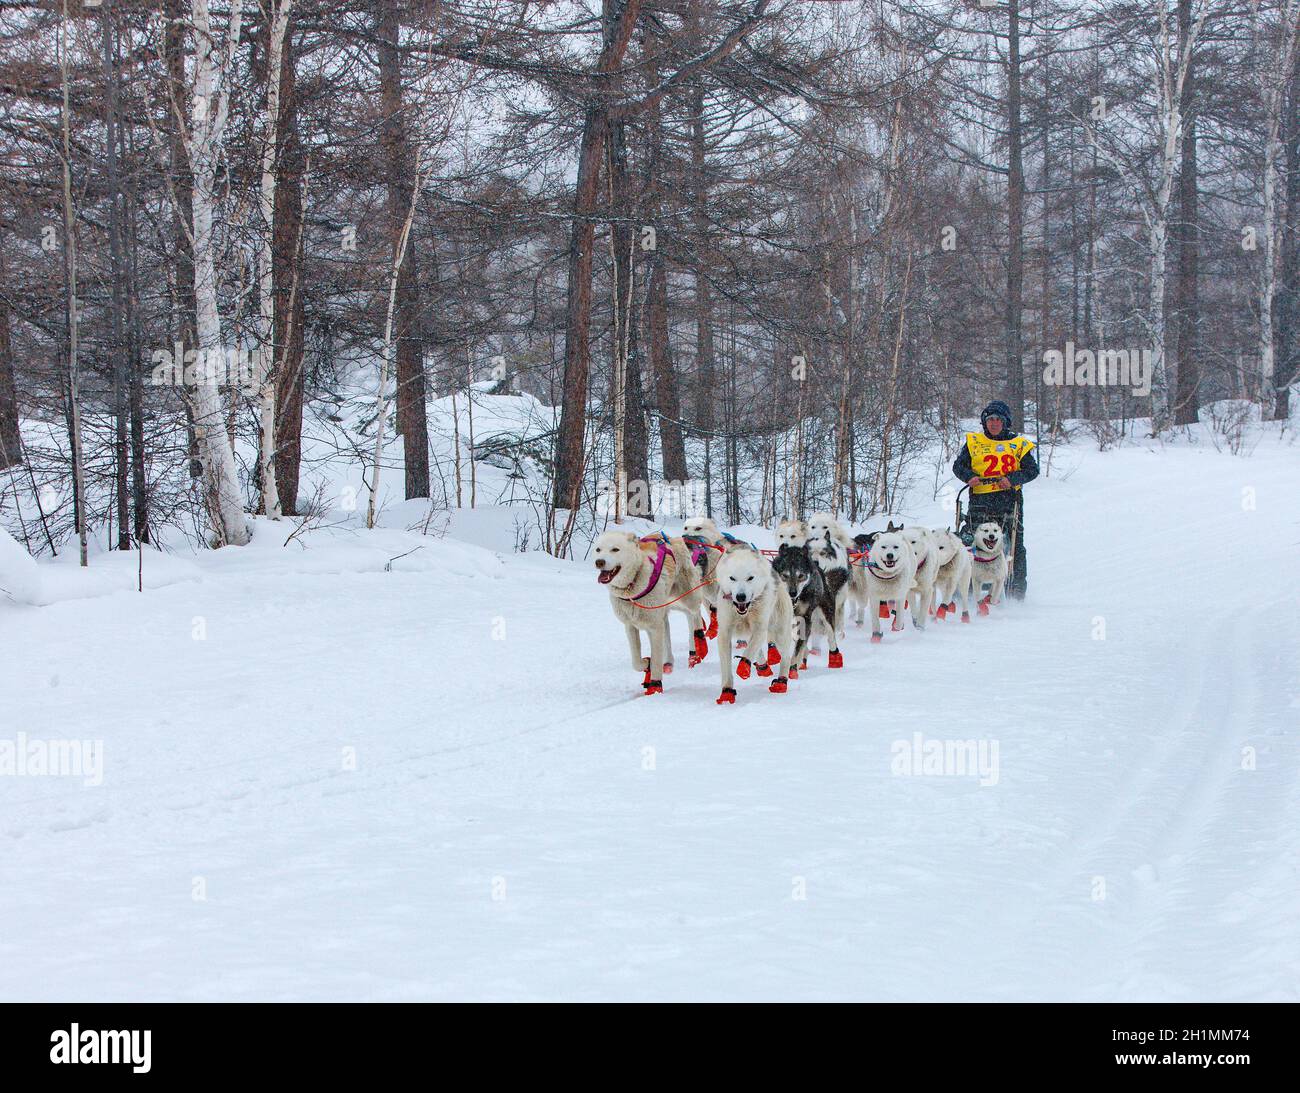 ESSO VILLAGE, KAMCHATKA, RUSSIA - MARCH 4, 2019: Running dog sledge team Kamchatka musher. Kamchatka Sled Dog Racing Beringia. Russian Far East, Kamch Stock Photo